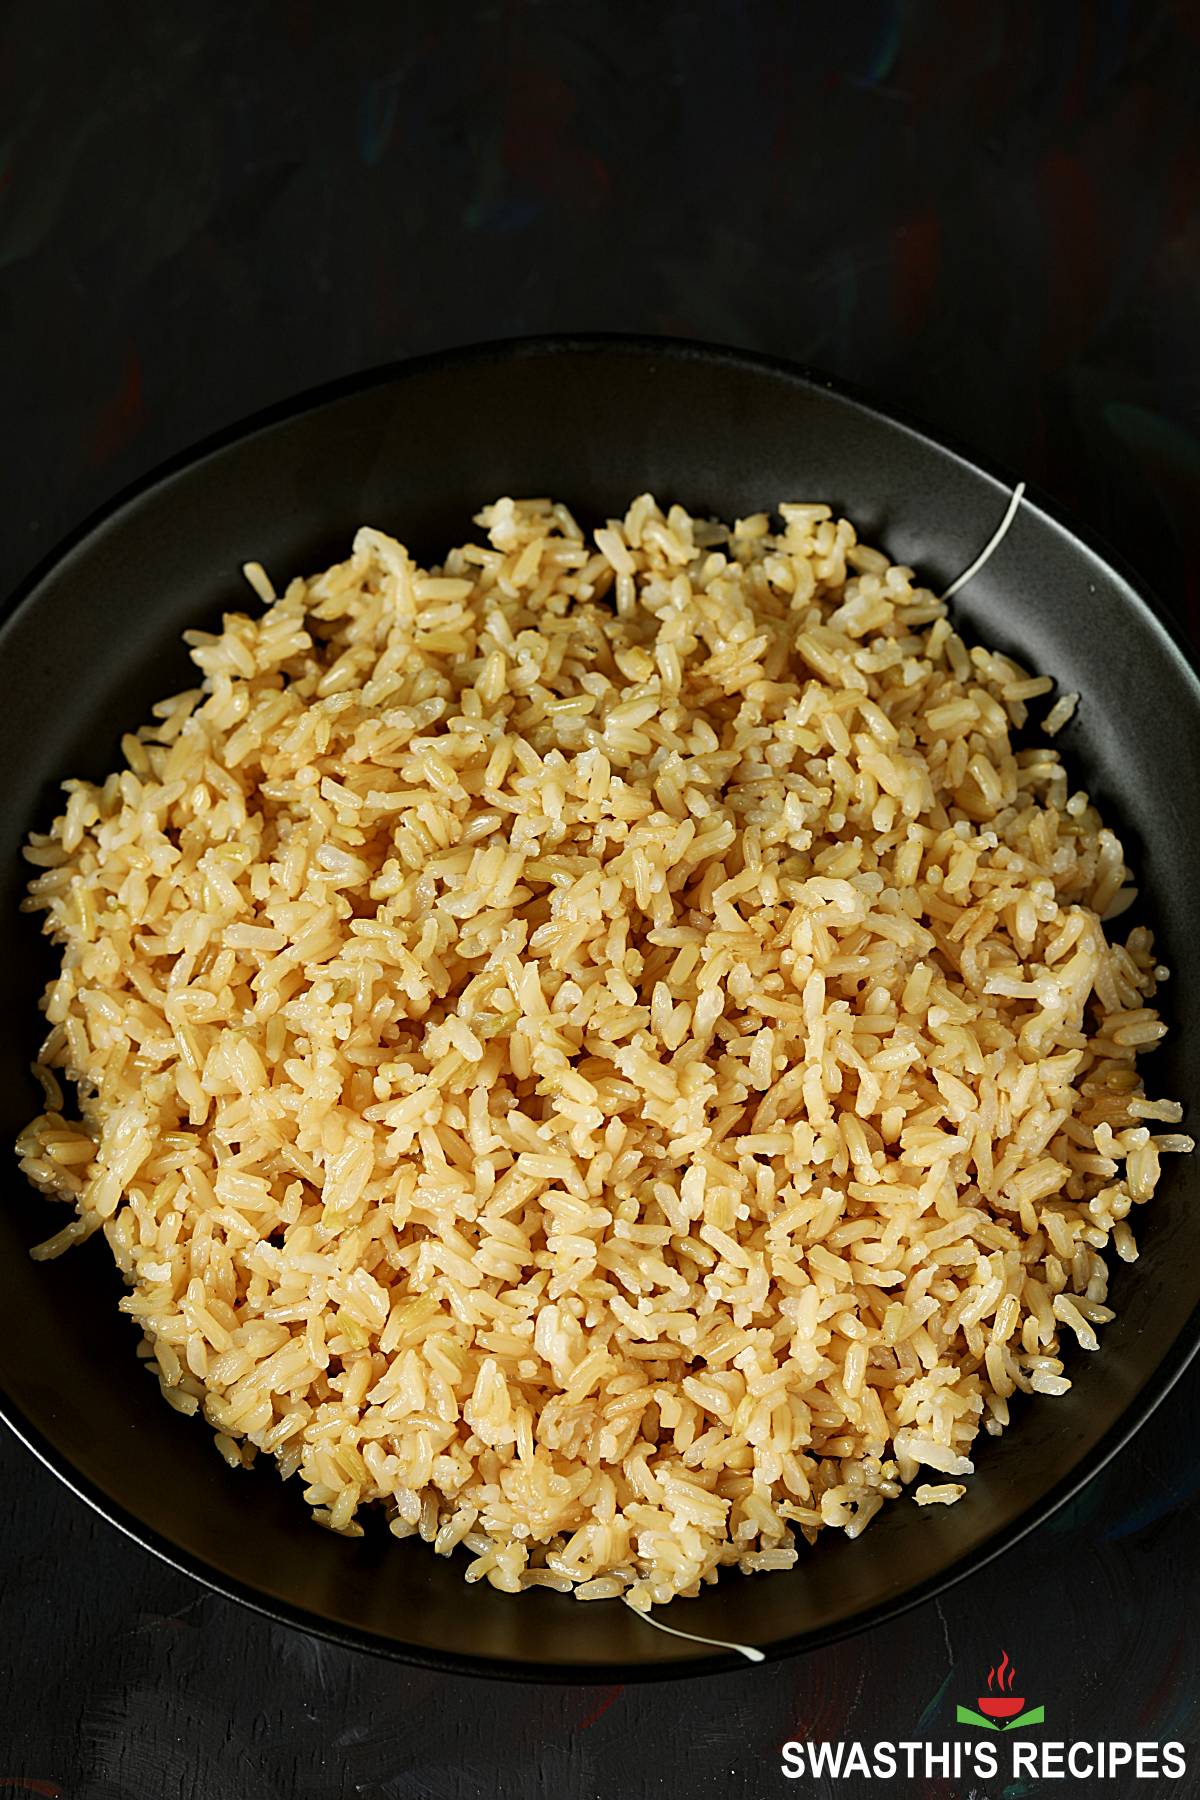 Instant Pot Brown Rice Recipe   Swasthi s Recipes - 9